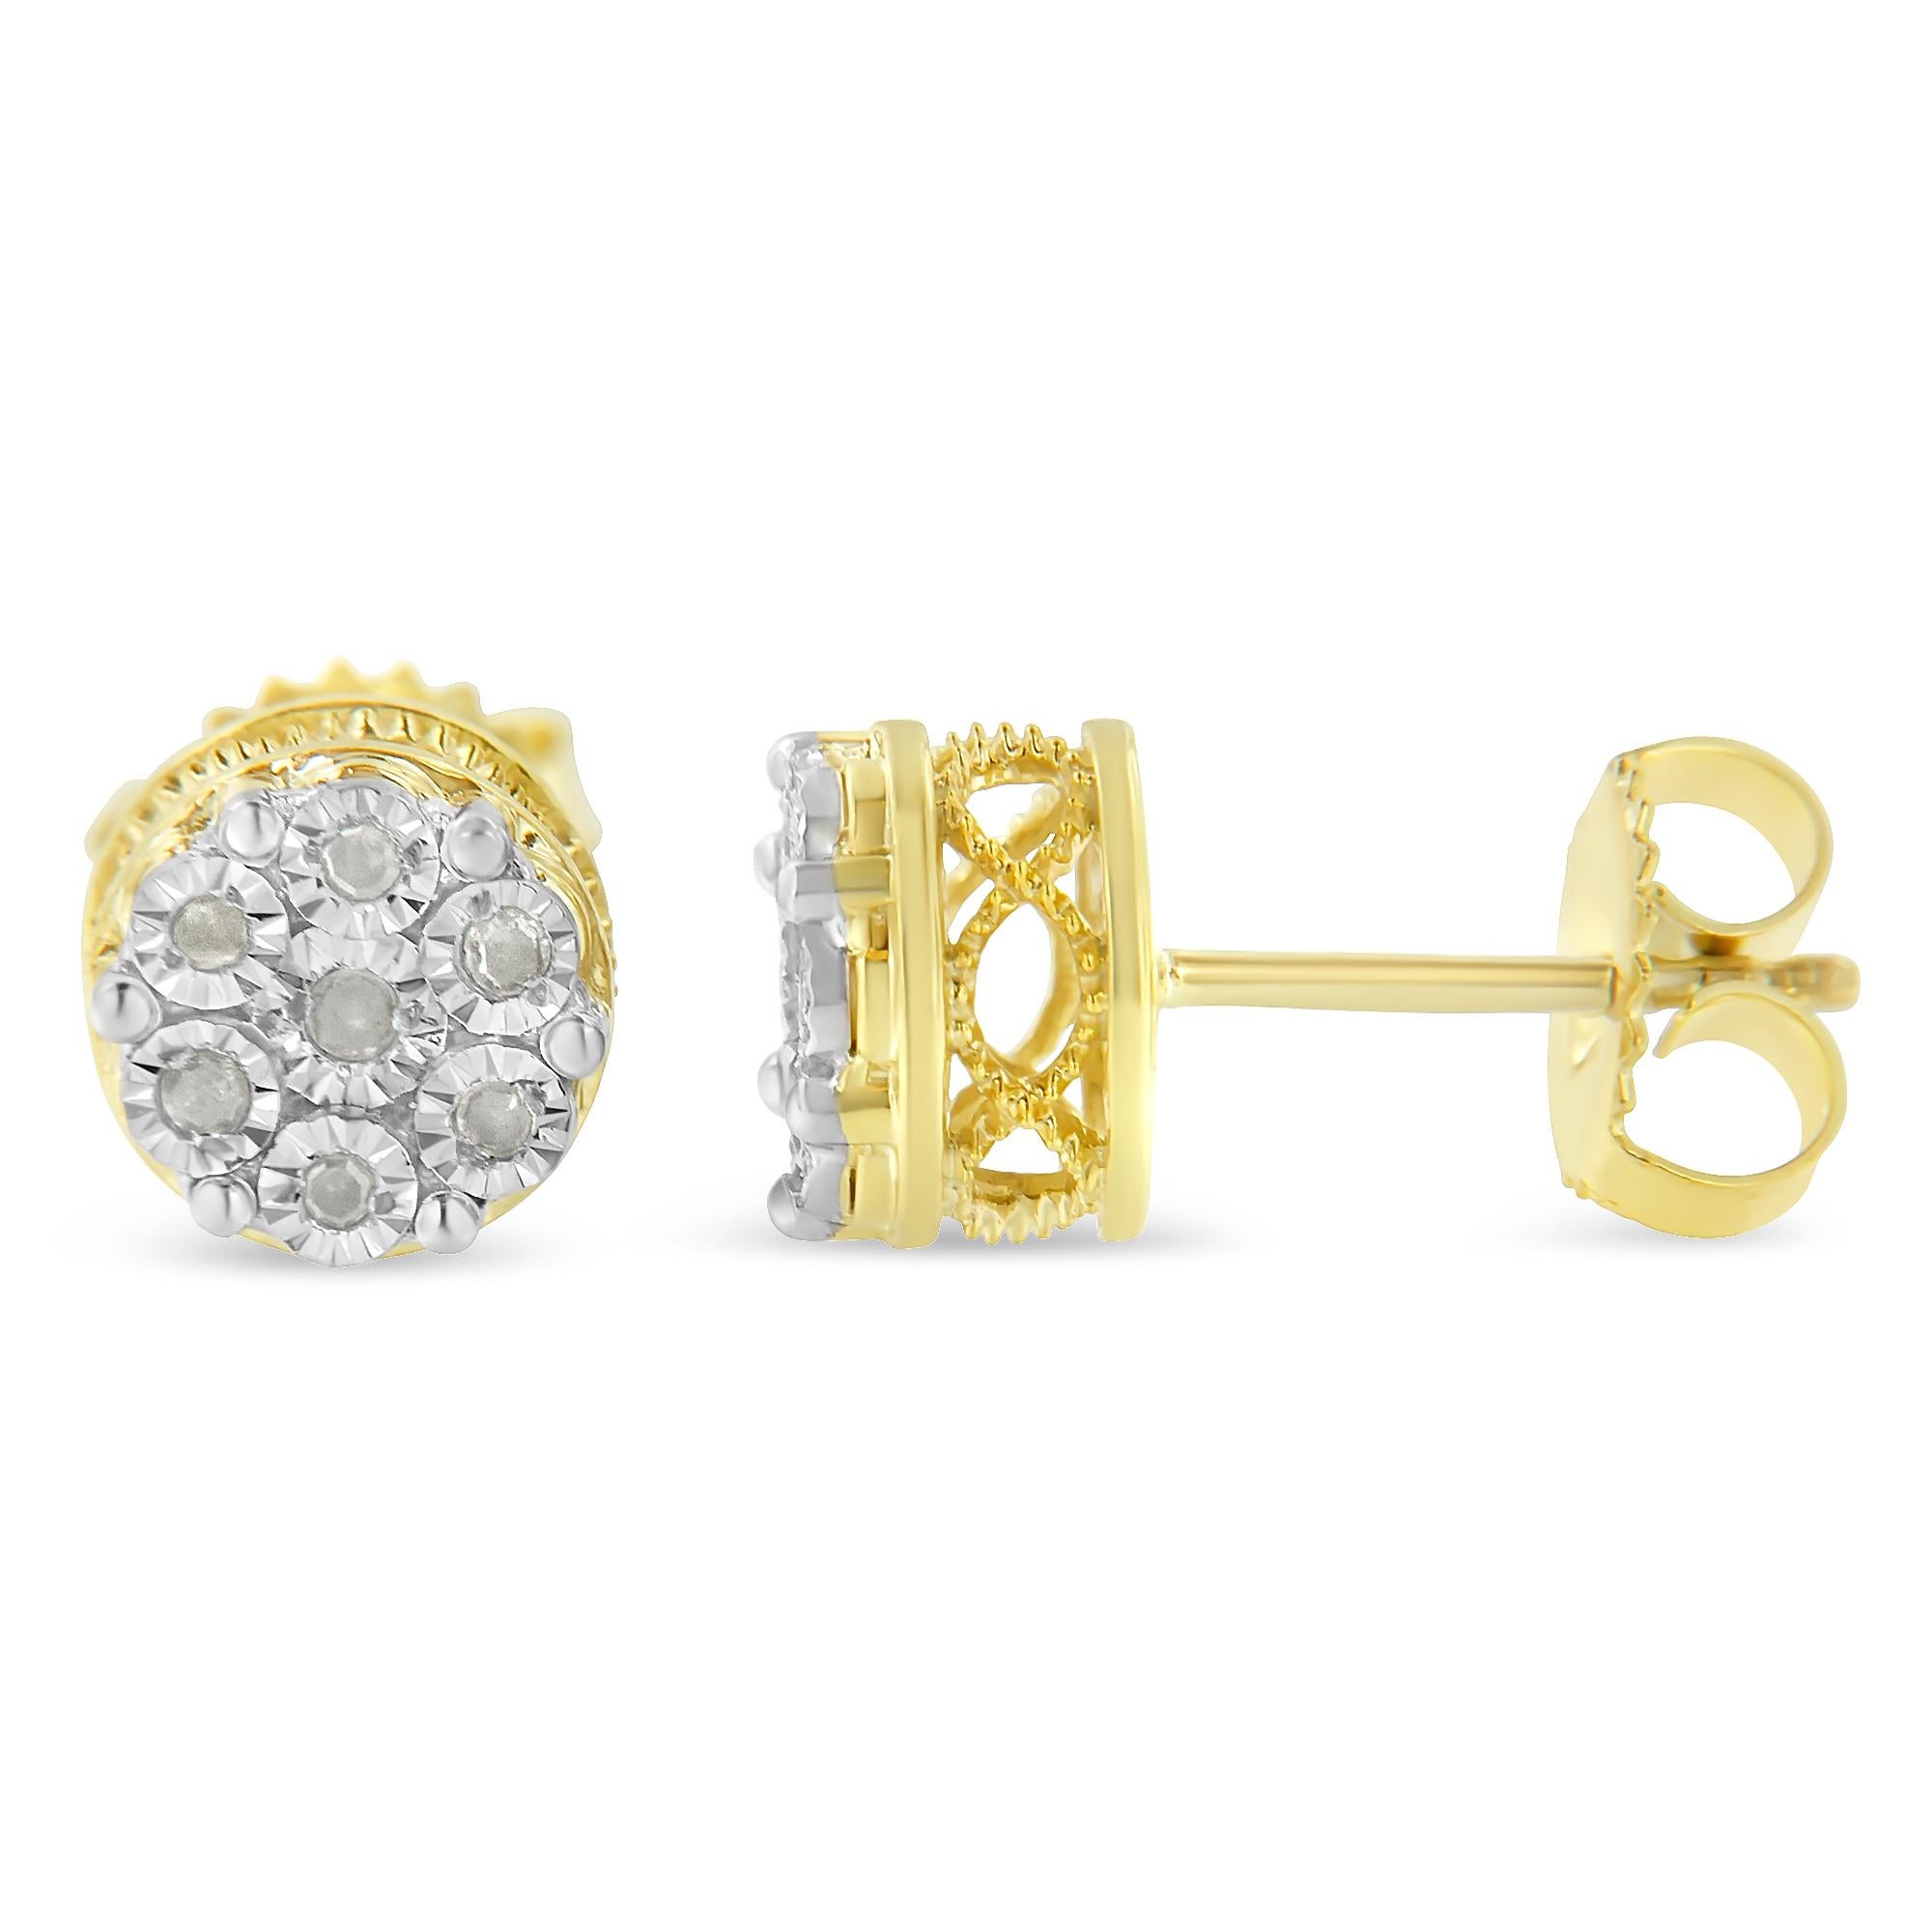 These striking cluster diamond earrings are made in 14k yellow gold plated sterling silver and feature 1/7ct TDW of promo quality round cut diamonds. Each earring features 7 miracle set shimmering diamonds that create a flower shaped cluster. The